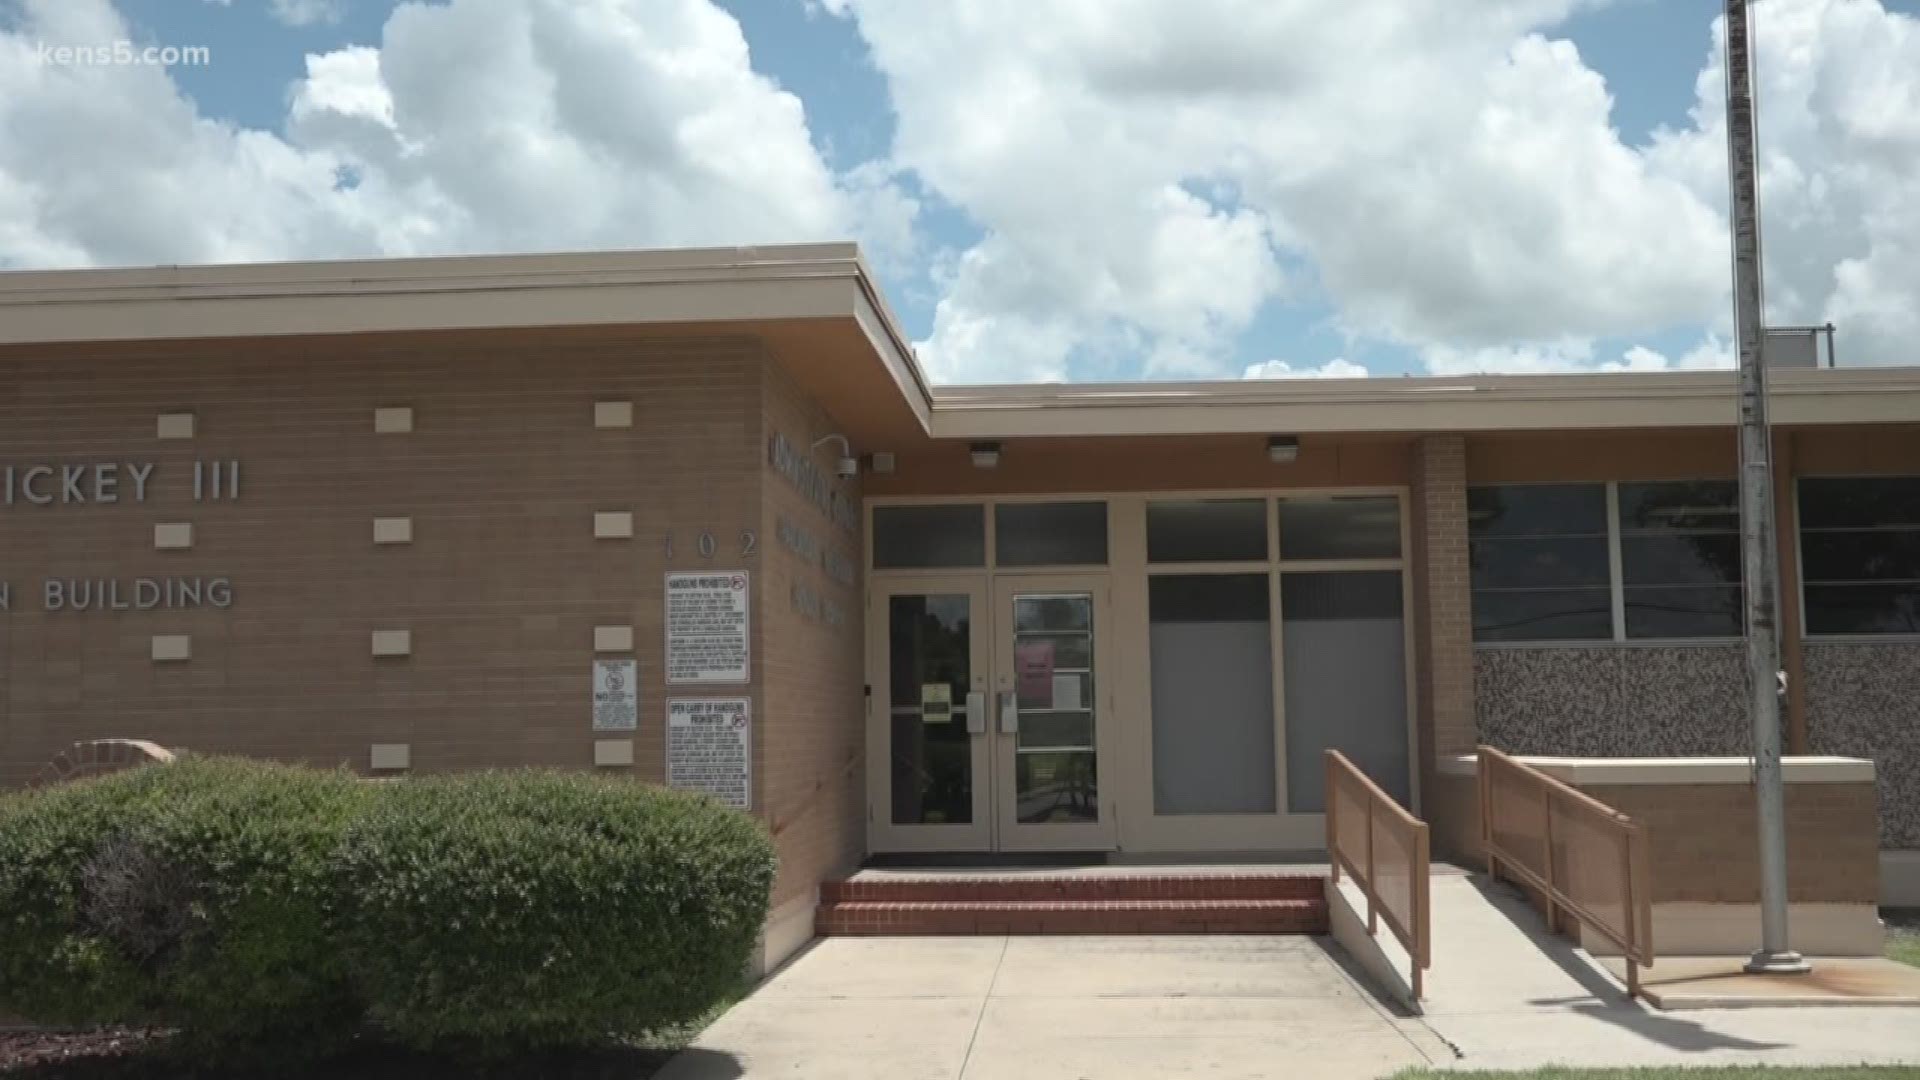 The Texas Education Agency is calling to eliminate the entire school board at the Harlandale Independent School District. But the trustees are not going down without a fight; they are changing up leadership with someone new.